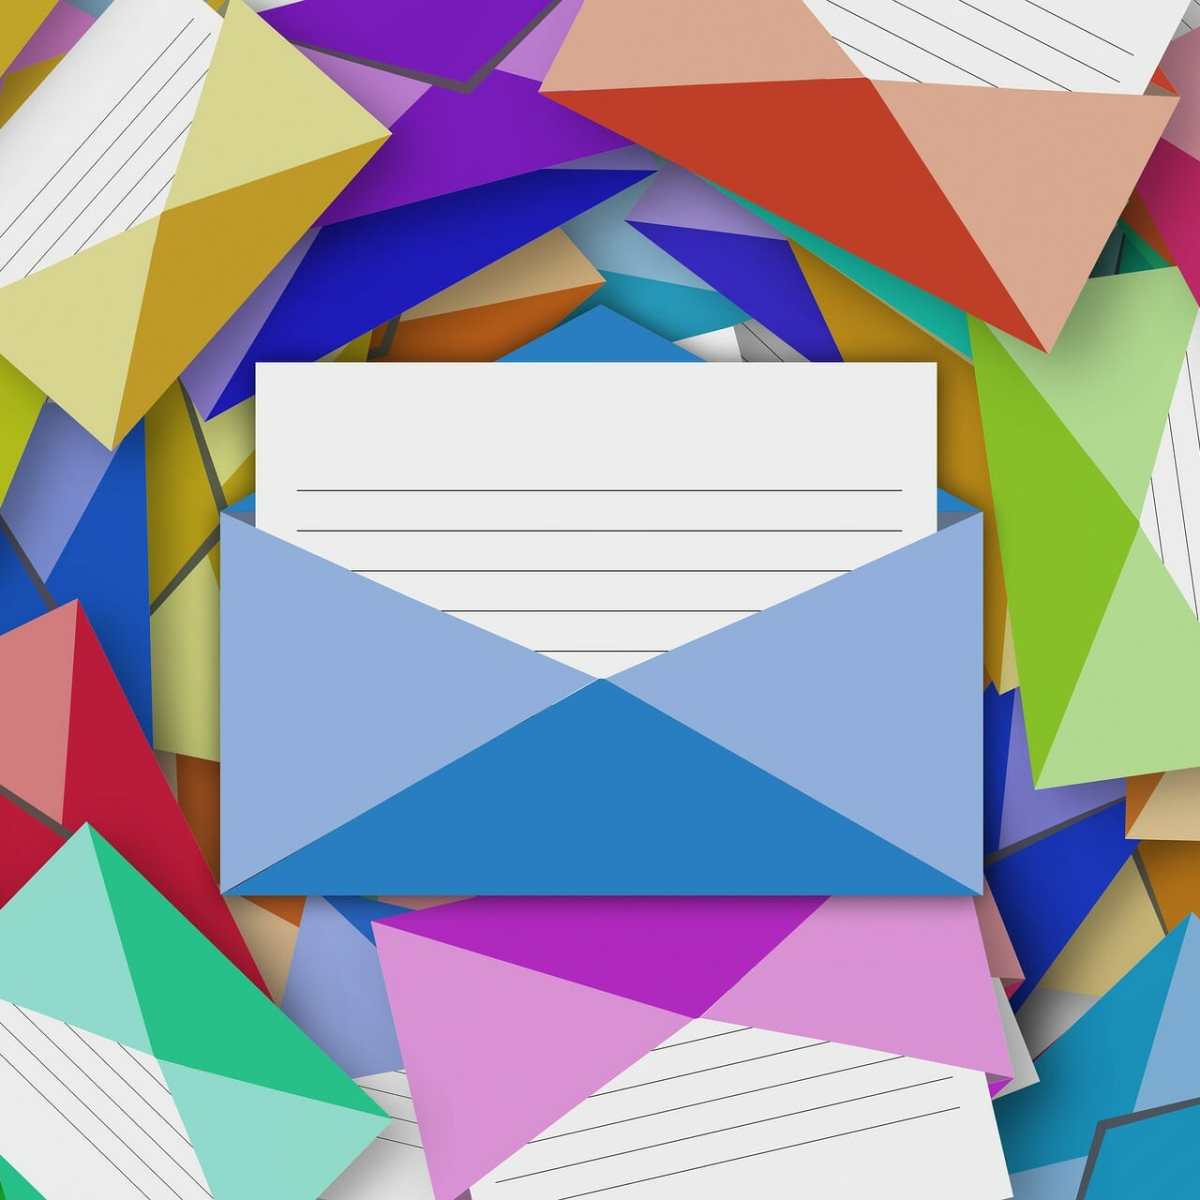 Common Email Mistakes that Derail Success